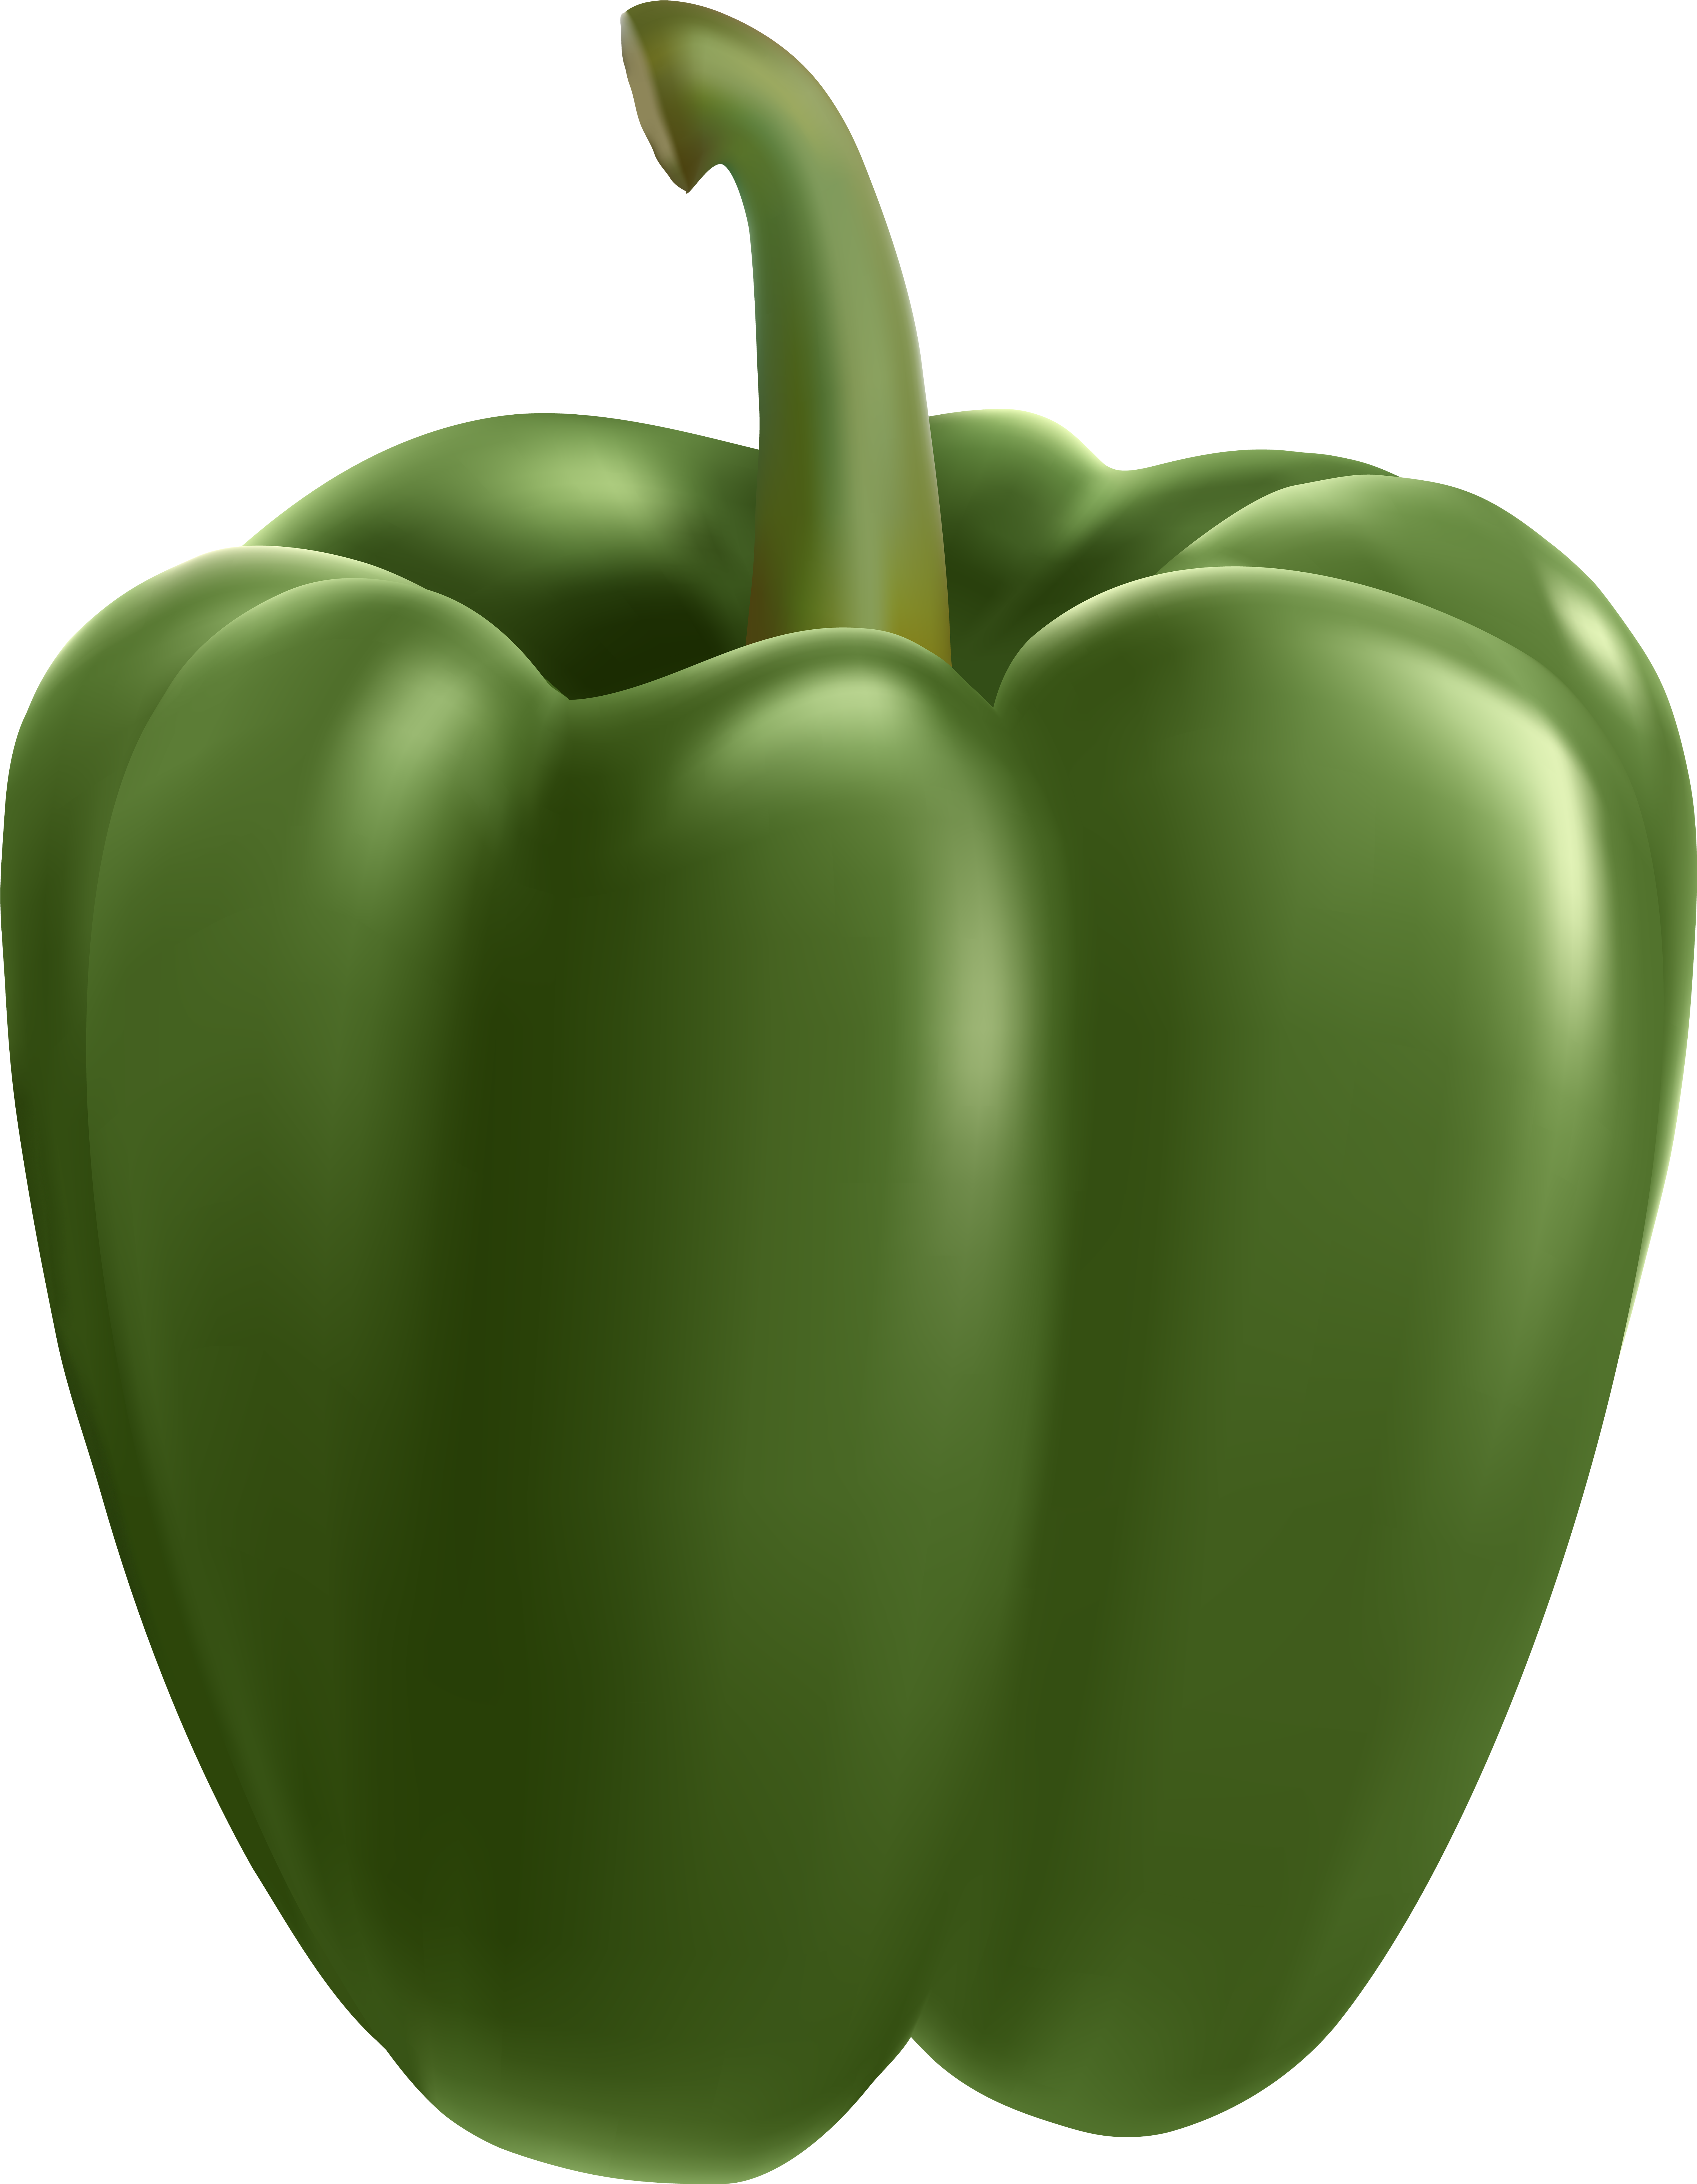 A Green Bell Pepper With A Stem